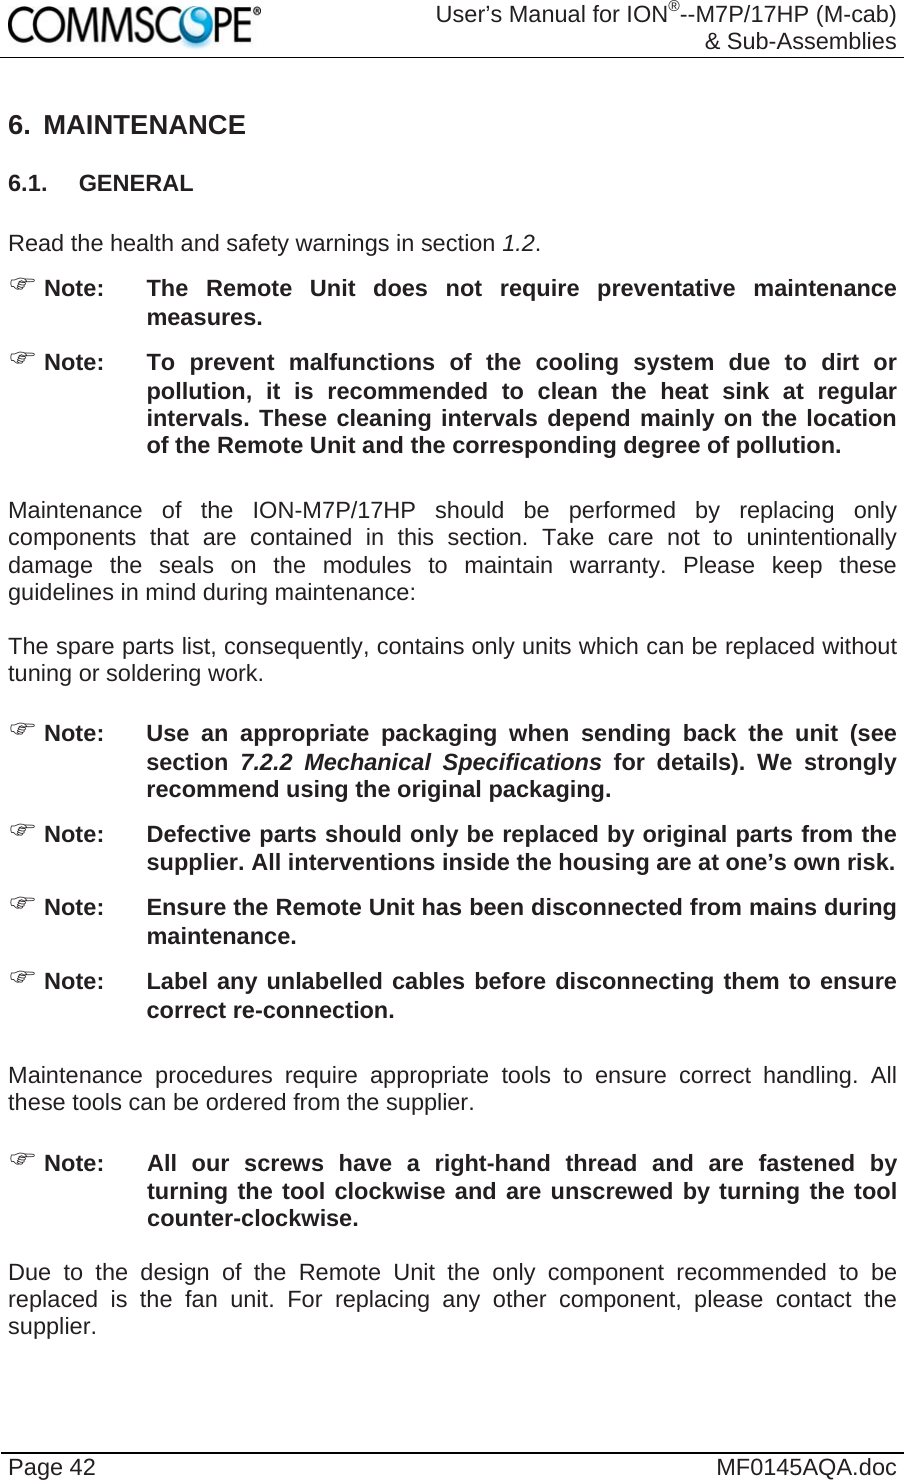  User’s Manual for ION®--M7P/17HP (M-cab) &amp; Sub-Assemblies Page 42  MF0145AQA.doc 6. MAINTENANCE 6.1. GENERAL  Read the health and safety warnings in section 1.2.  Note:  The Remote Unit does not require preventative maintenance measures.  Note:  To prevent malfunctions of the cooling system due to dirt or pollution, it is recommended to clean the heat sink at regular intervals. These cleaning intervals depend mainly on the location of the Remote Unit and the corresponding degree of pollution.  Maintenance of the ION-M7P/17HP should be performed by replacing only components that are contained in this section. Take care not to unintentionally damage the seals on the modules to maintain warranty. Please keep these guidelines in mind during maintenance:  The spare parts list, consequently, contains only units which can be replaced without tuning or soldering work.   Note:  Use an appropriate packaging when sending back the unit (see section 7.2.2 Mechanical Specifications for details). We strongly recommend using the original packaging.  Note:  Defective parts should only be replaced by original parts from the supplier. All interventions inside the housing are at one’s own risk.  Note:  Ensure the Remote Unit has been disconnected from mains during maintenance.  Note:  Label any unlabelled cables before disconnecting them to ensure correct re-connection.  Maintenance procedures require appropriate tools to ensure correct handling. All these tools can be ordered from the supplier.    Note:  All our screws have a right-hand thread and are fastened by turning the tool clockwise and are unscrewed by turning the tool counter-clockwise.  Due to the design of the Remote Unit the only component recommended to be replaced is the fan unit. For replacing any other component, please contact the supplier.  